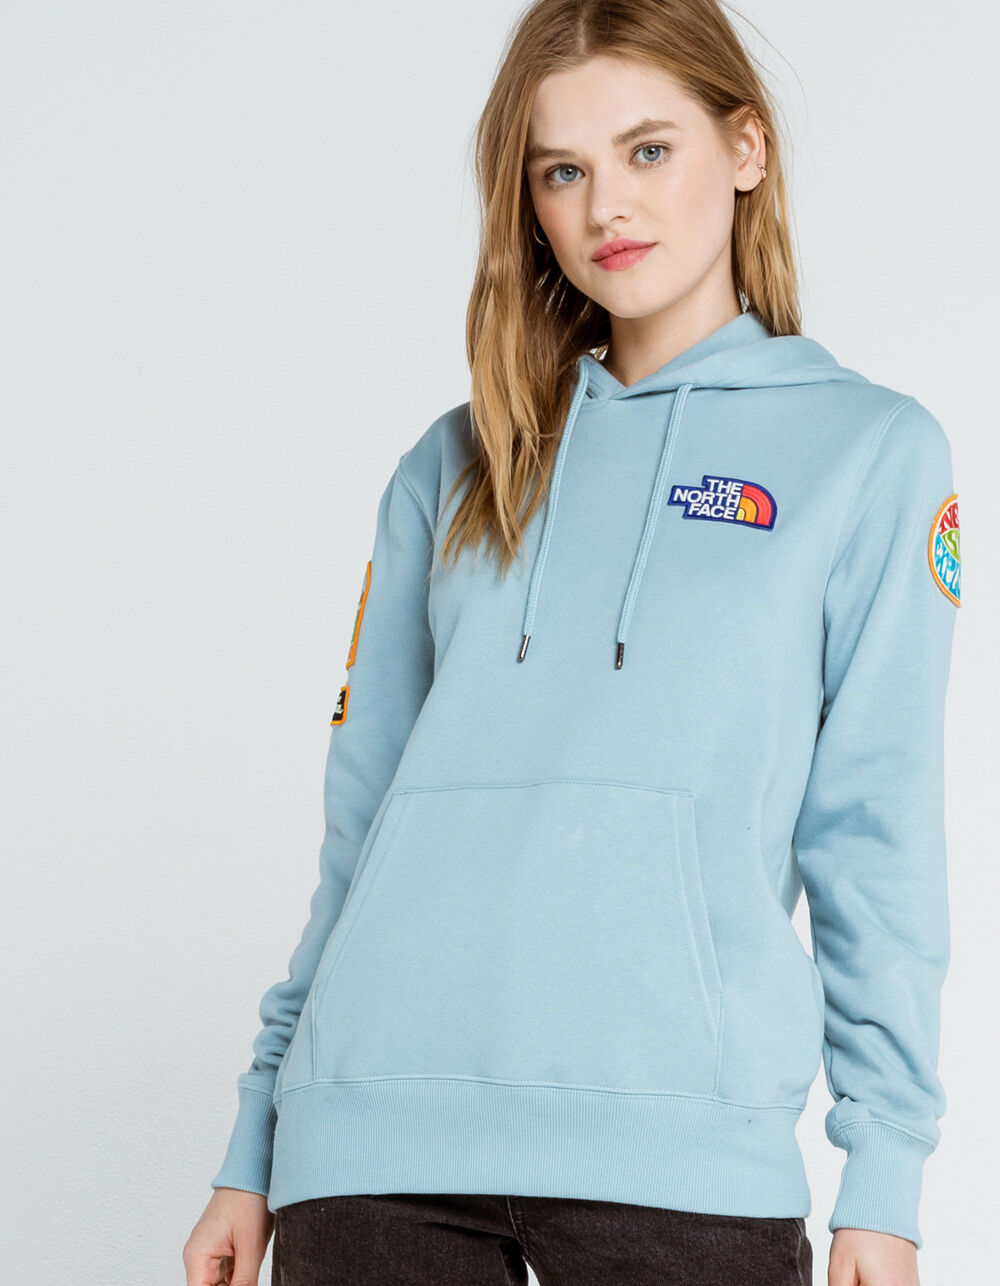 THE NORTH FACE Novelty Patch Womens Hoodie - SLATE BLUE | Tillys